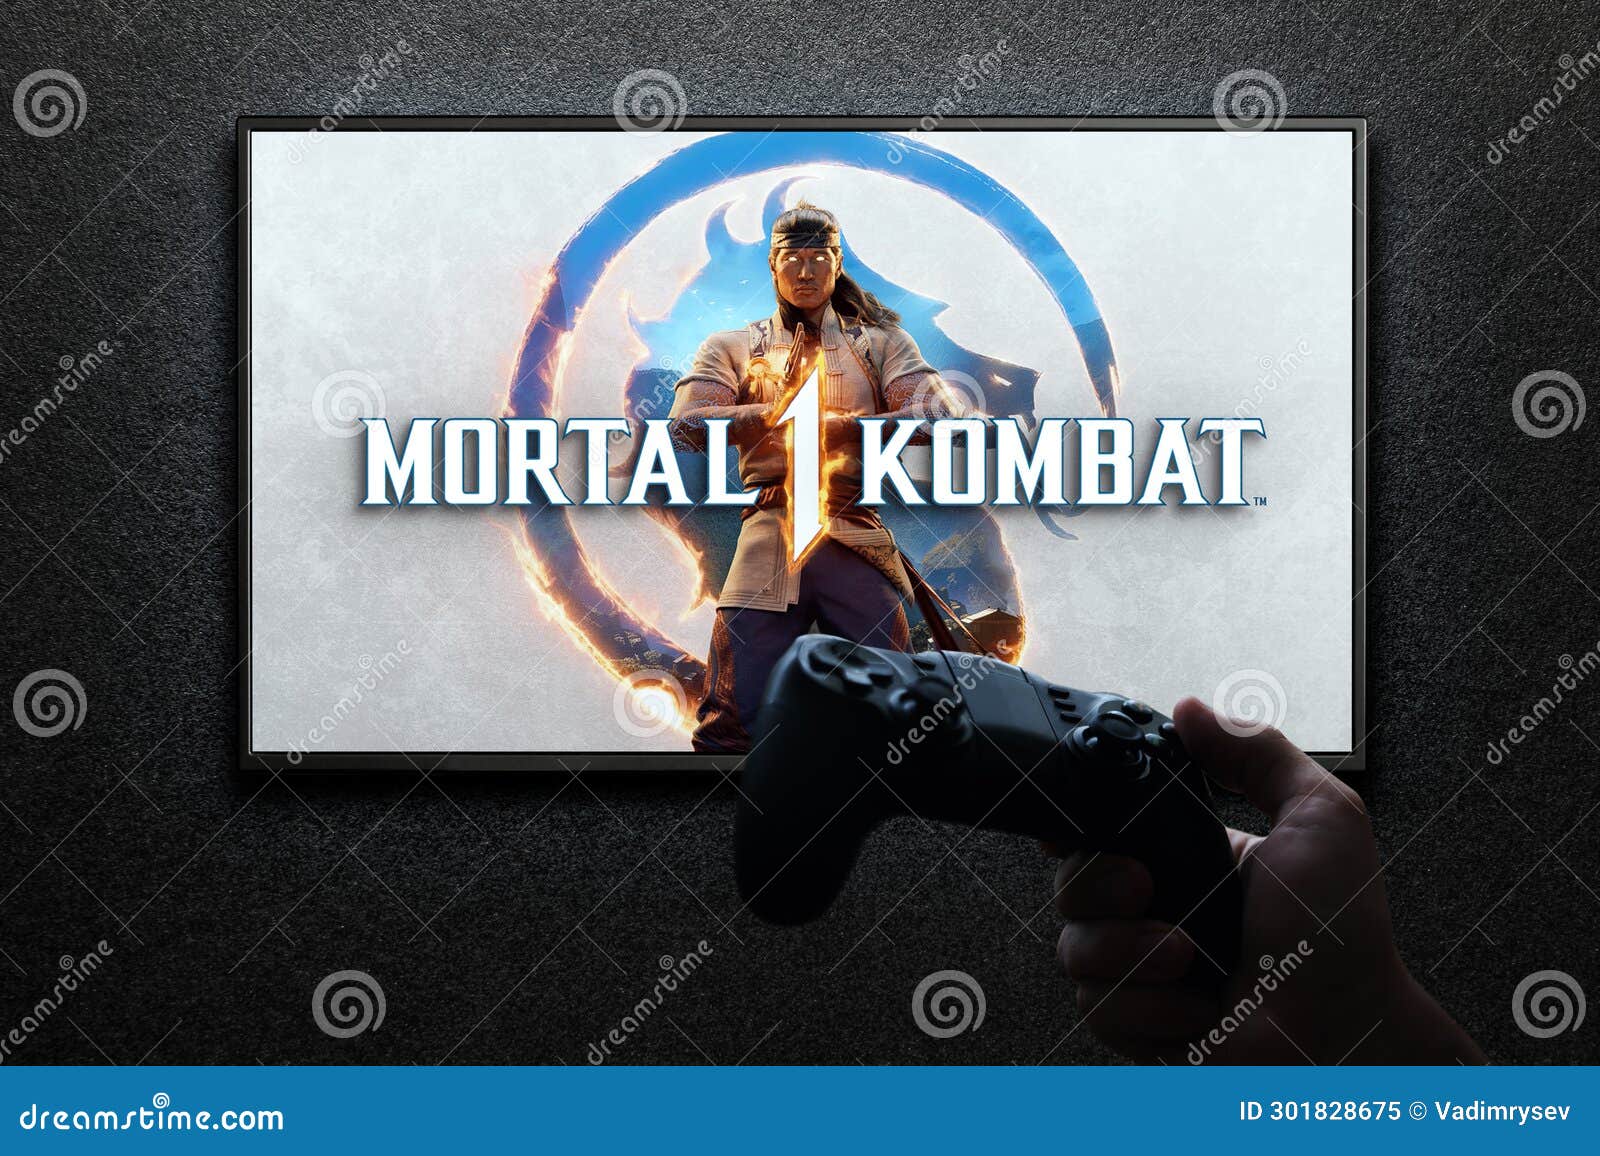 Mortal Kombat 1 Game on TV Screen with Gamepad in Hand on Black Textured  Wall with Light. Editorial Image - Image of combat, mk12: 301828675